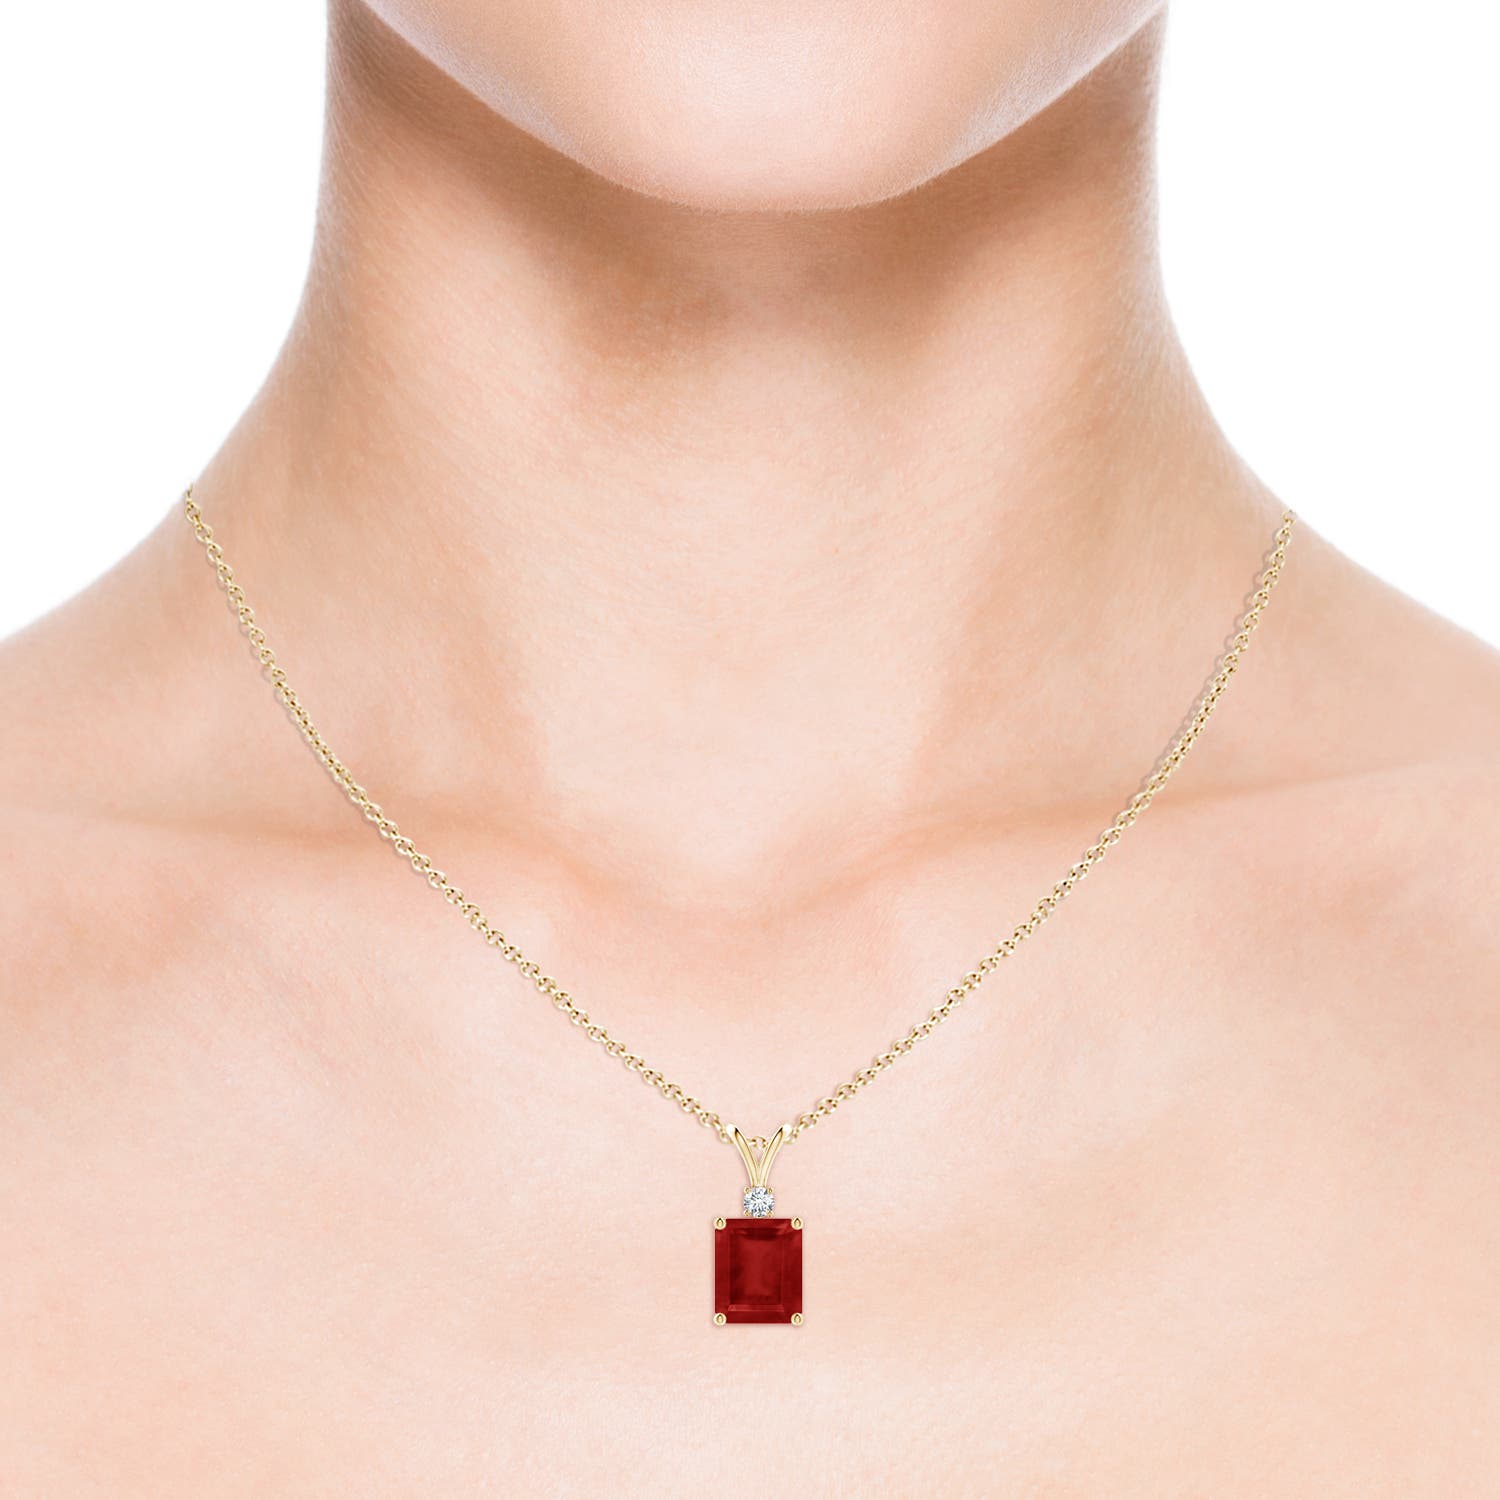 AA - Ruby / 6.41 CT / 14 KT Yellow Gold